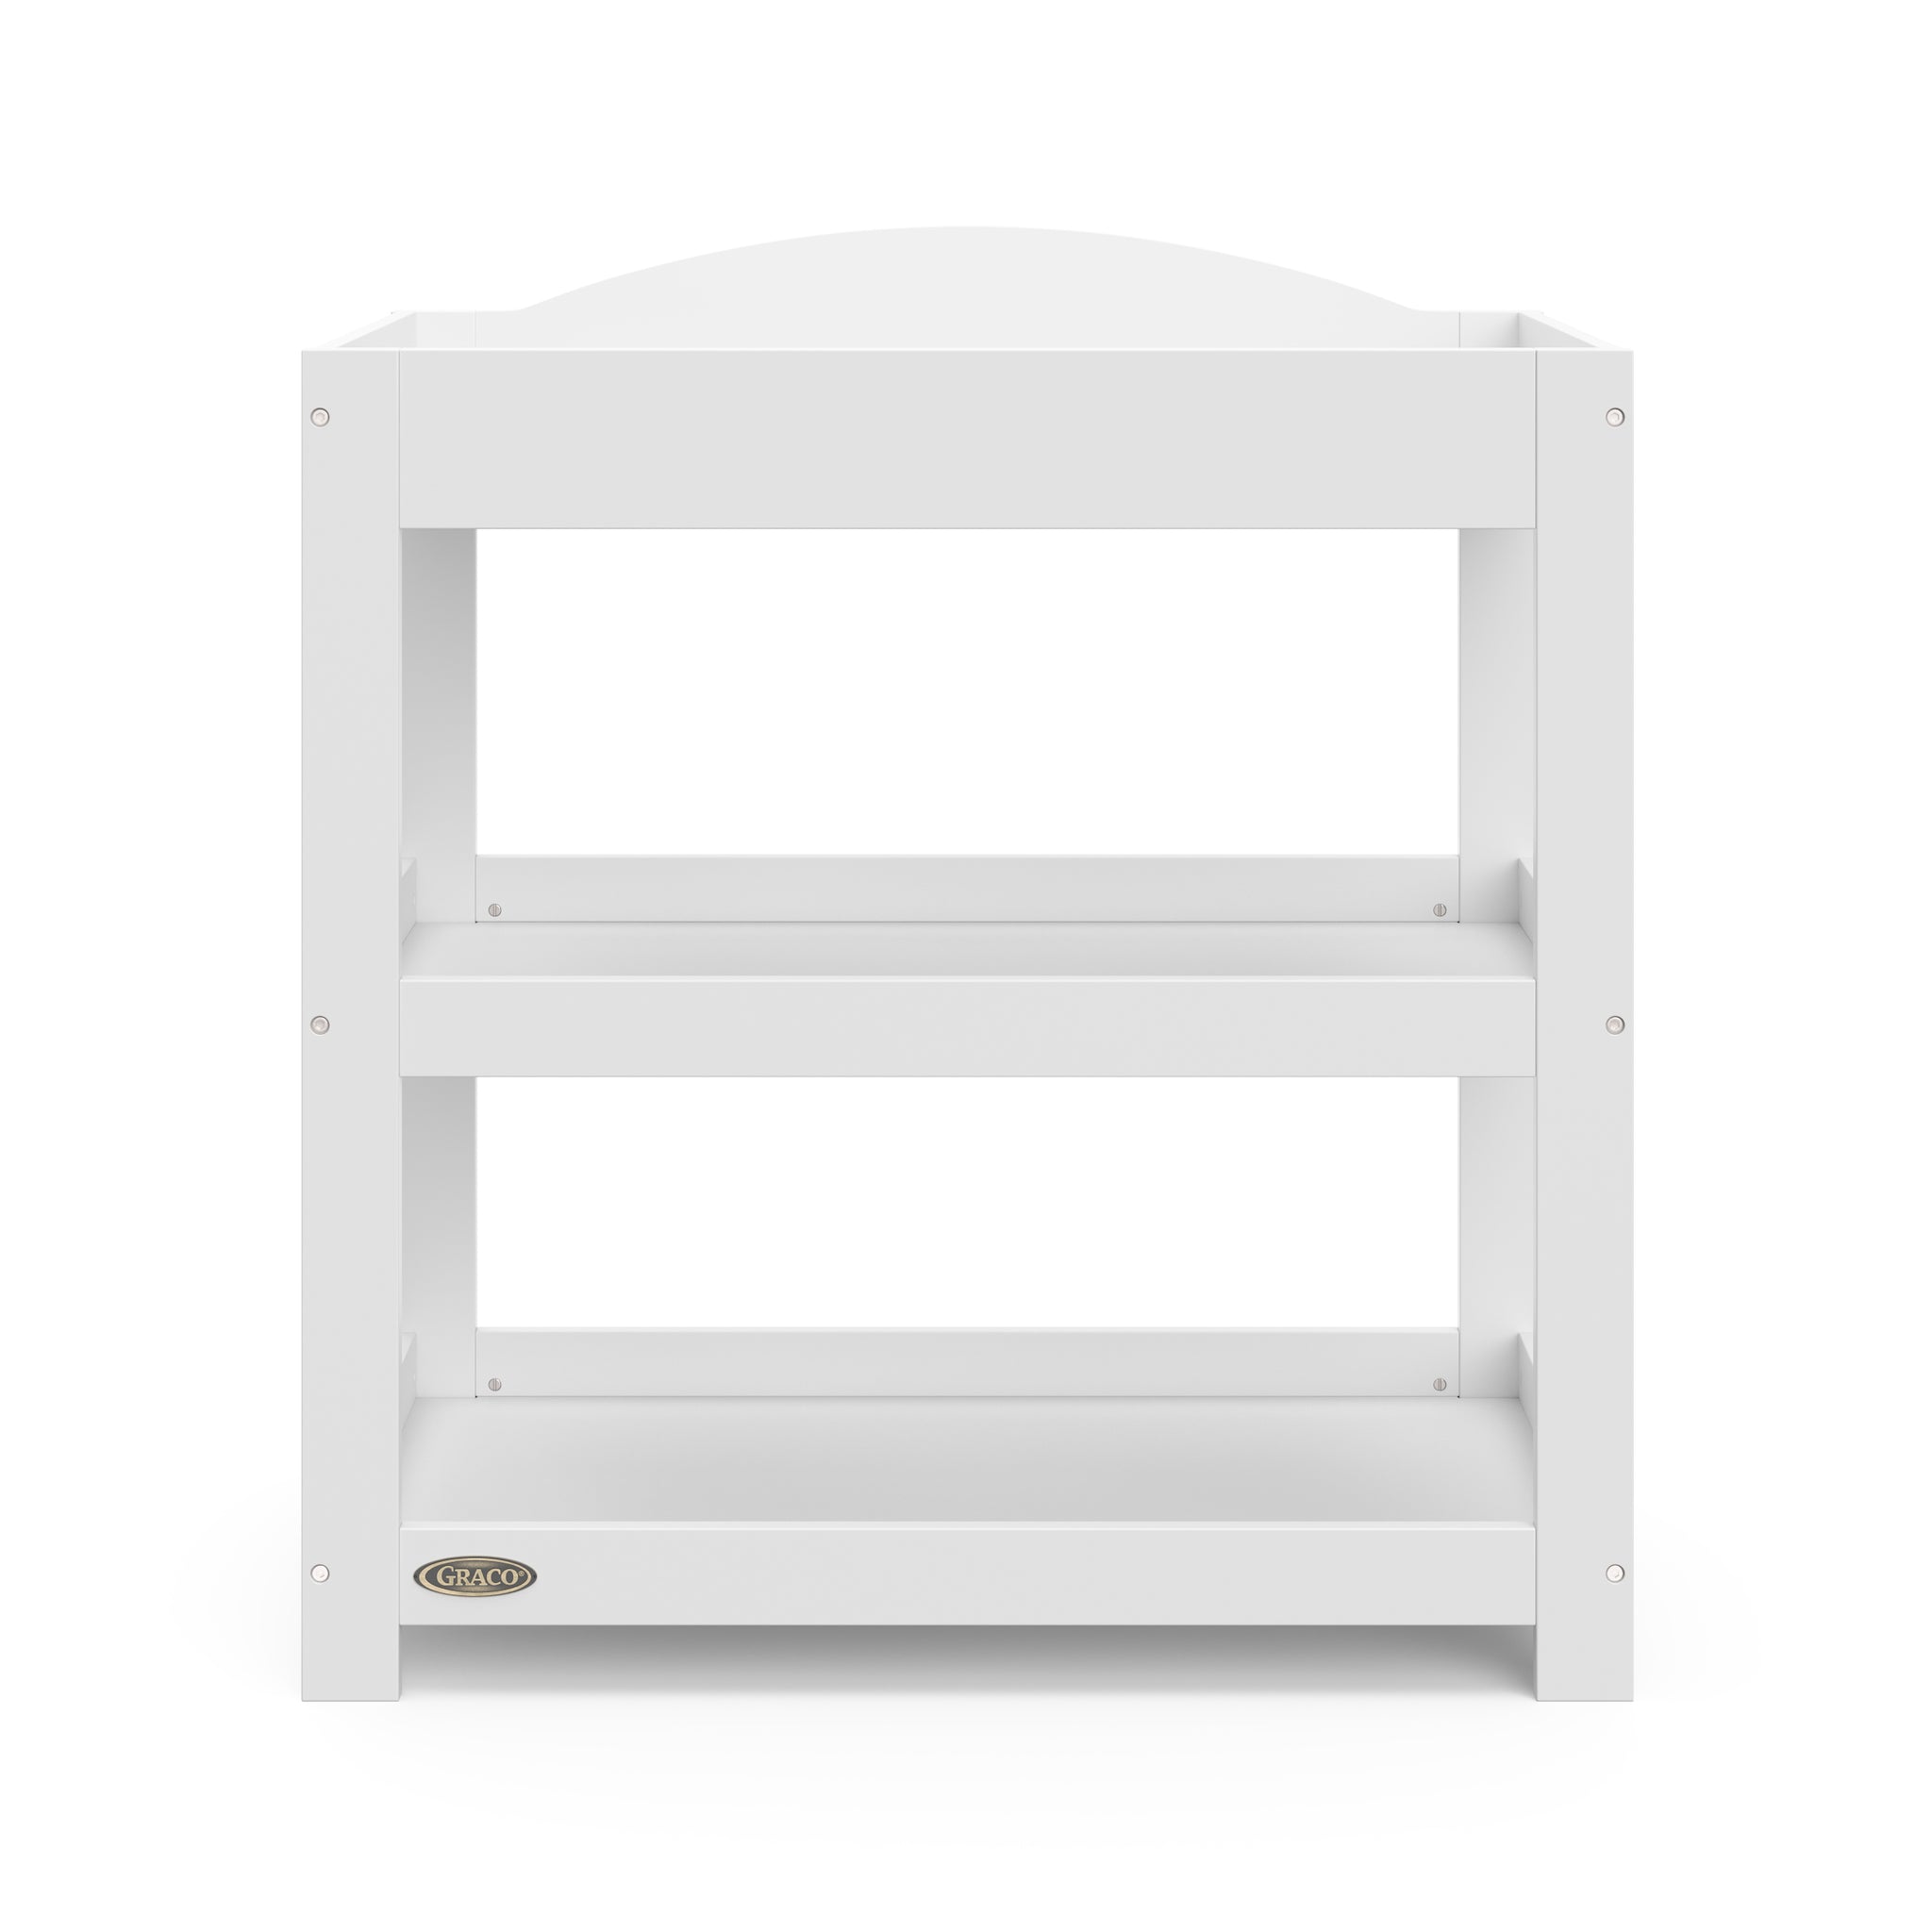 Front view of white changing table with removable headboard and two open shelves